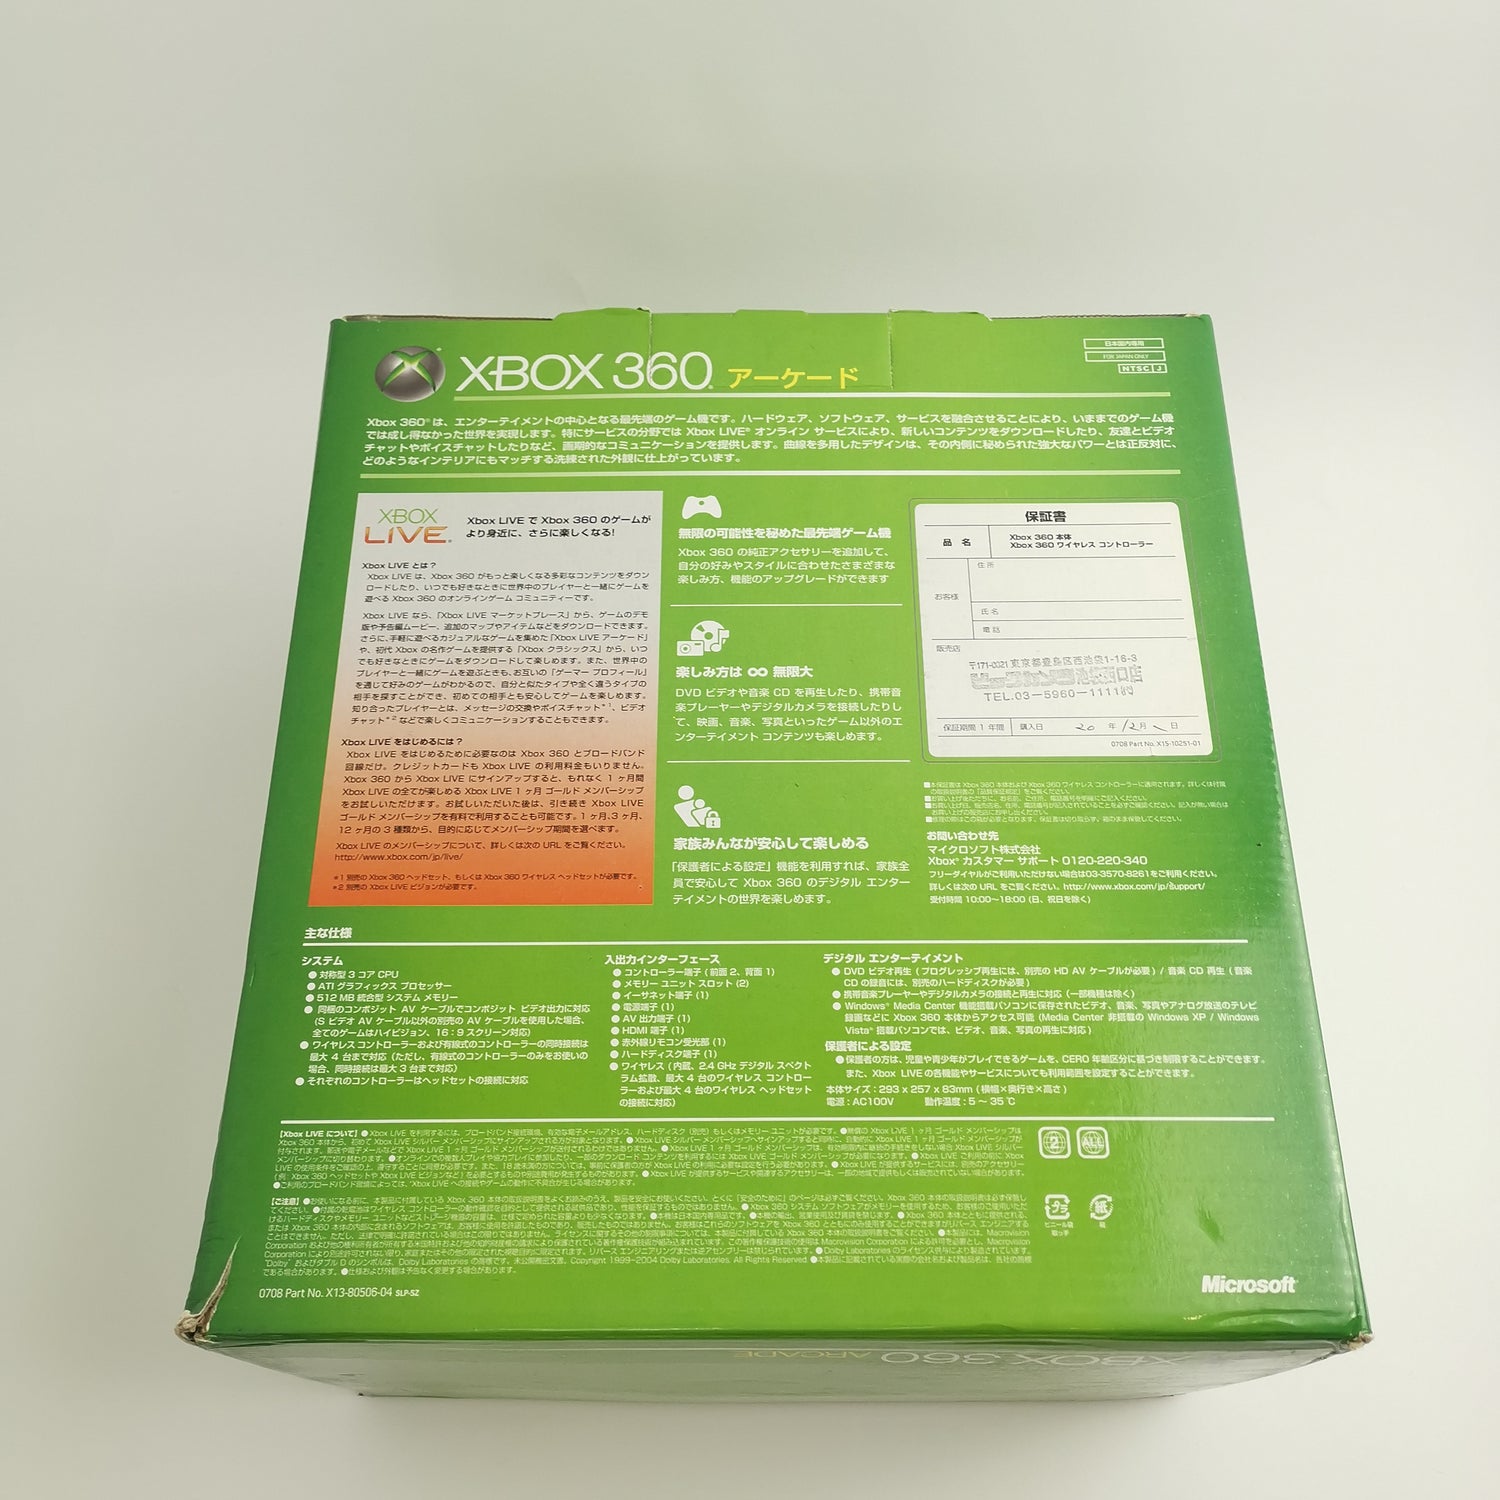 Microsoft Xbox 360 Console: Xbox360 Arcade Japanese with 18 games | Original packaging JAPAN